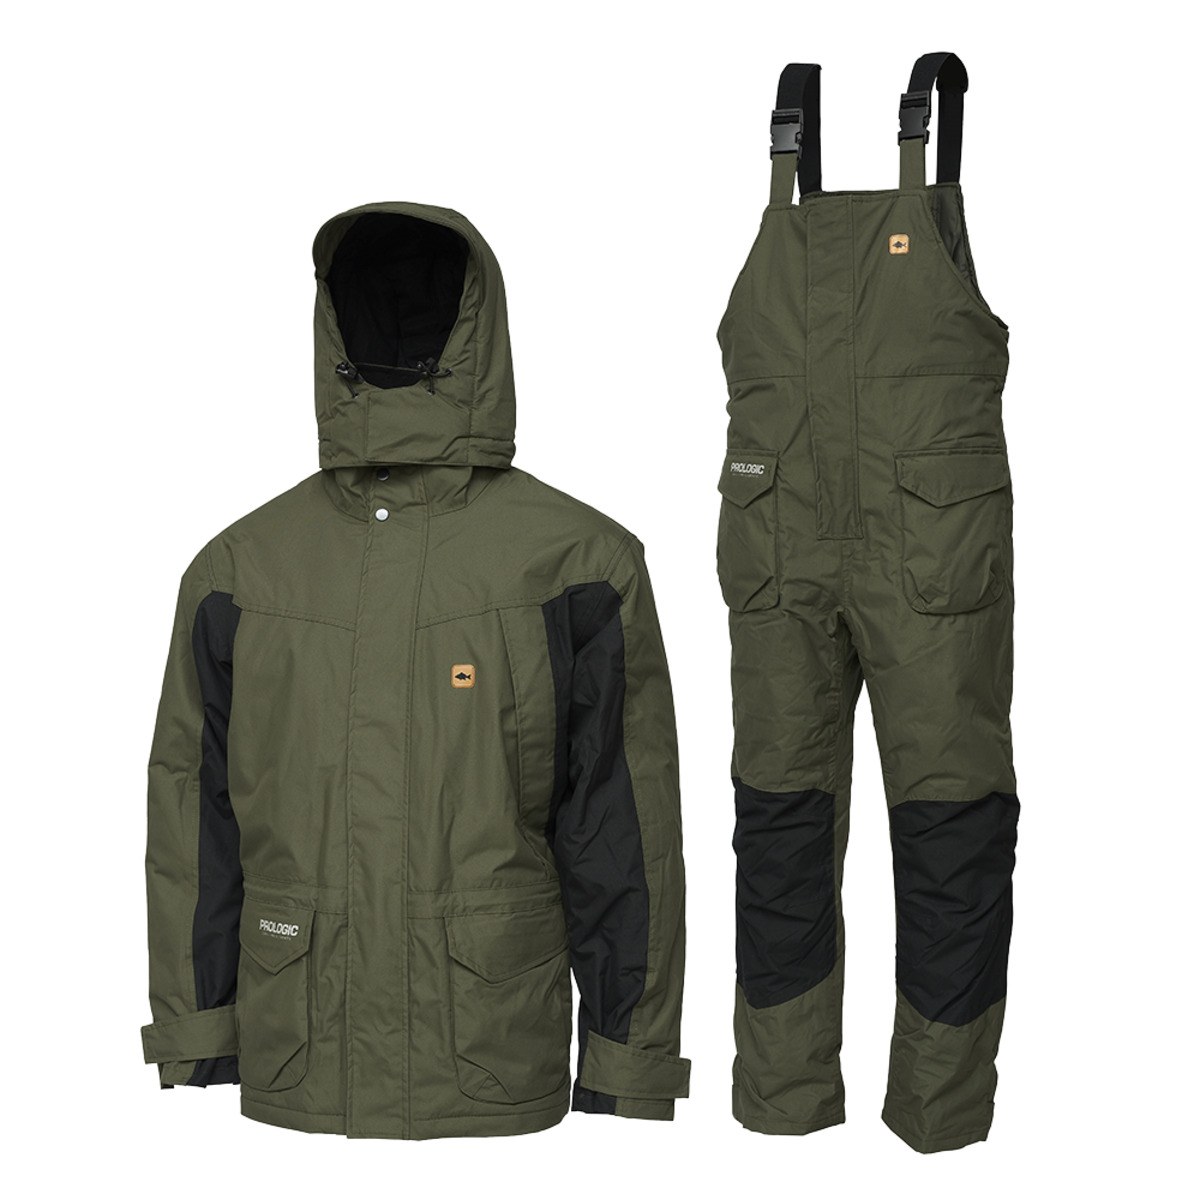 Prologic Highgrade Thermo Suit - L GREEN/BLACK